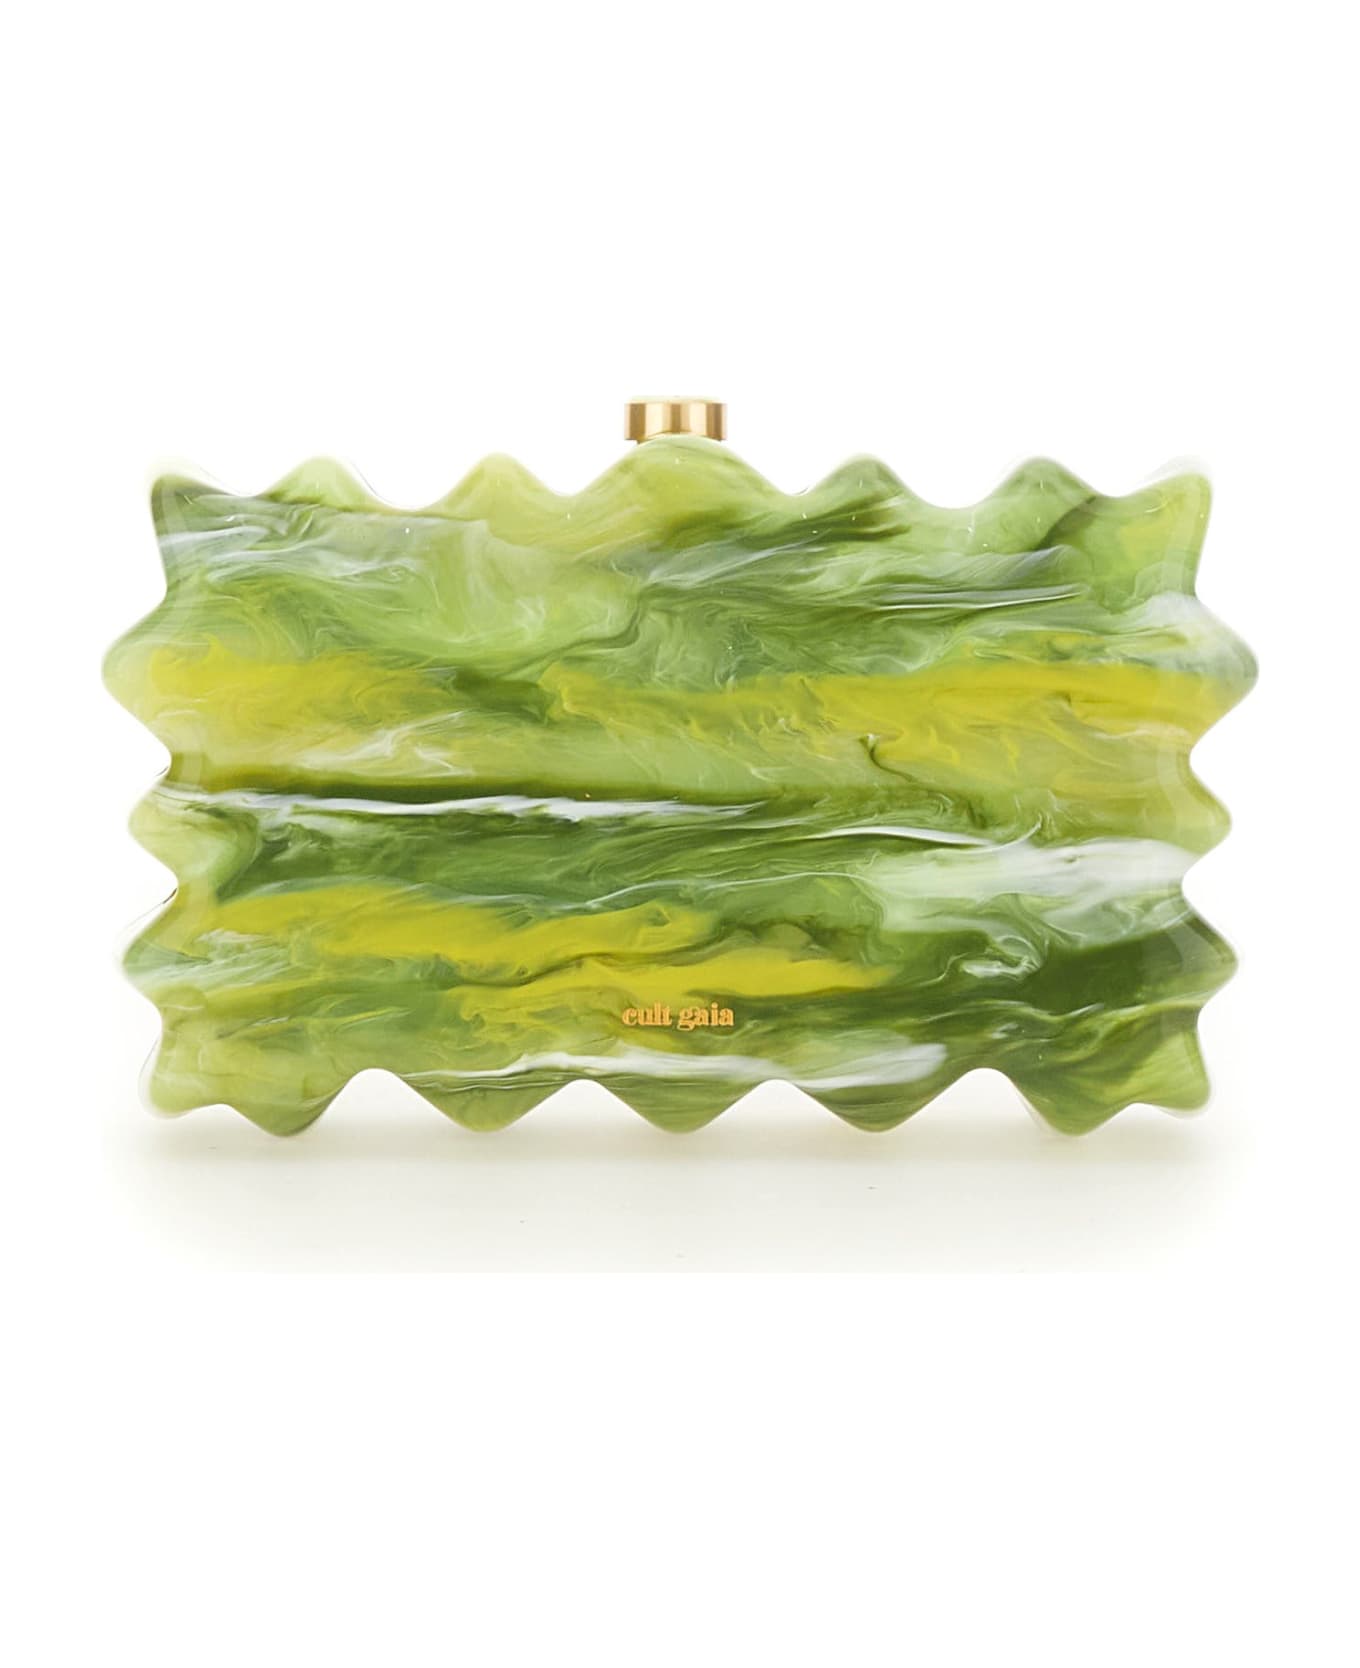 Cult Gaia Clutch 'paloma' - Green クラッチバッグ